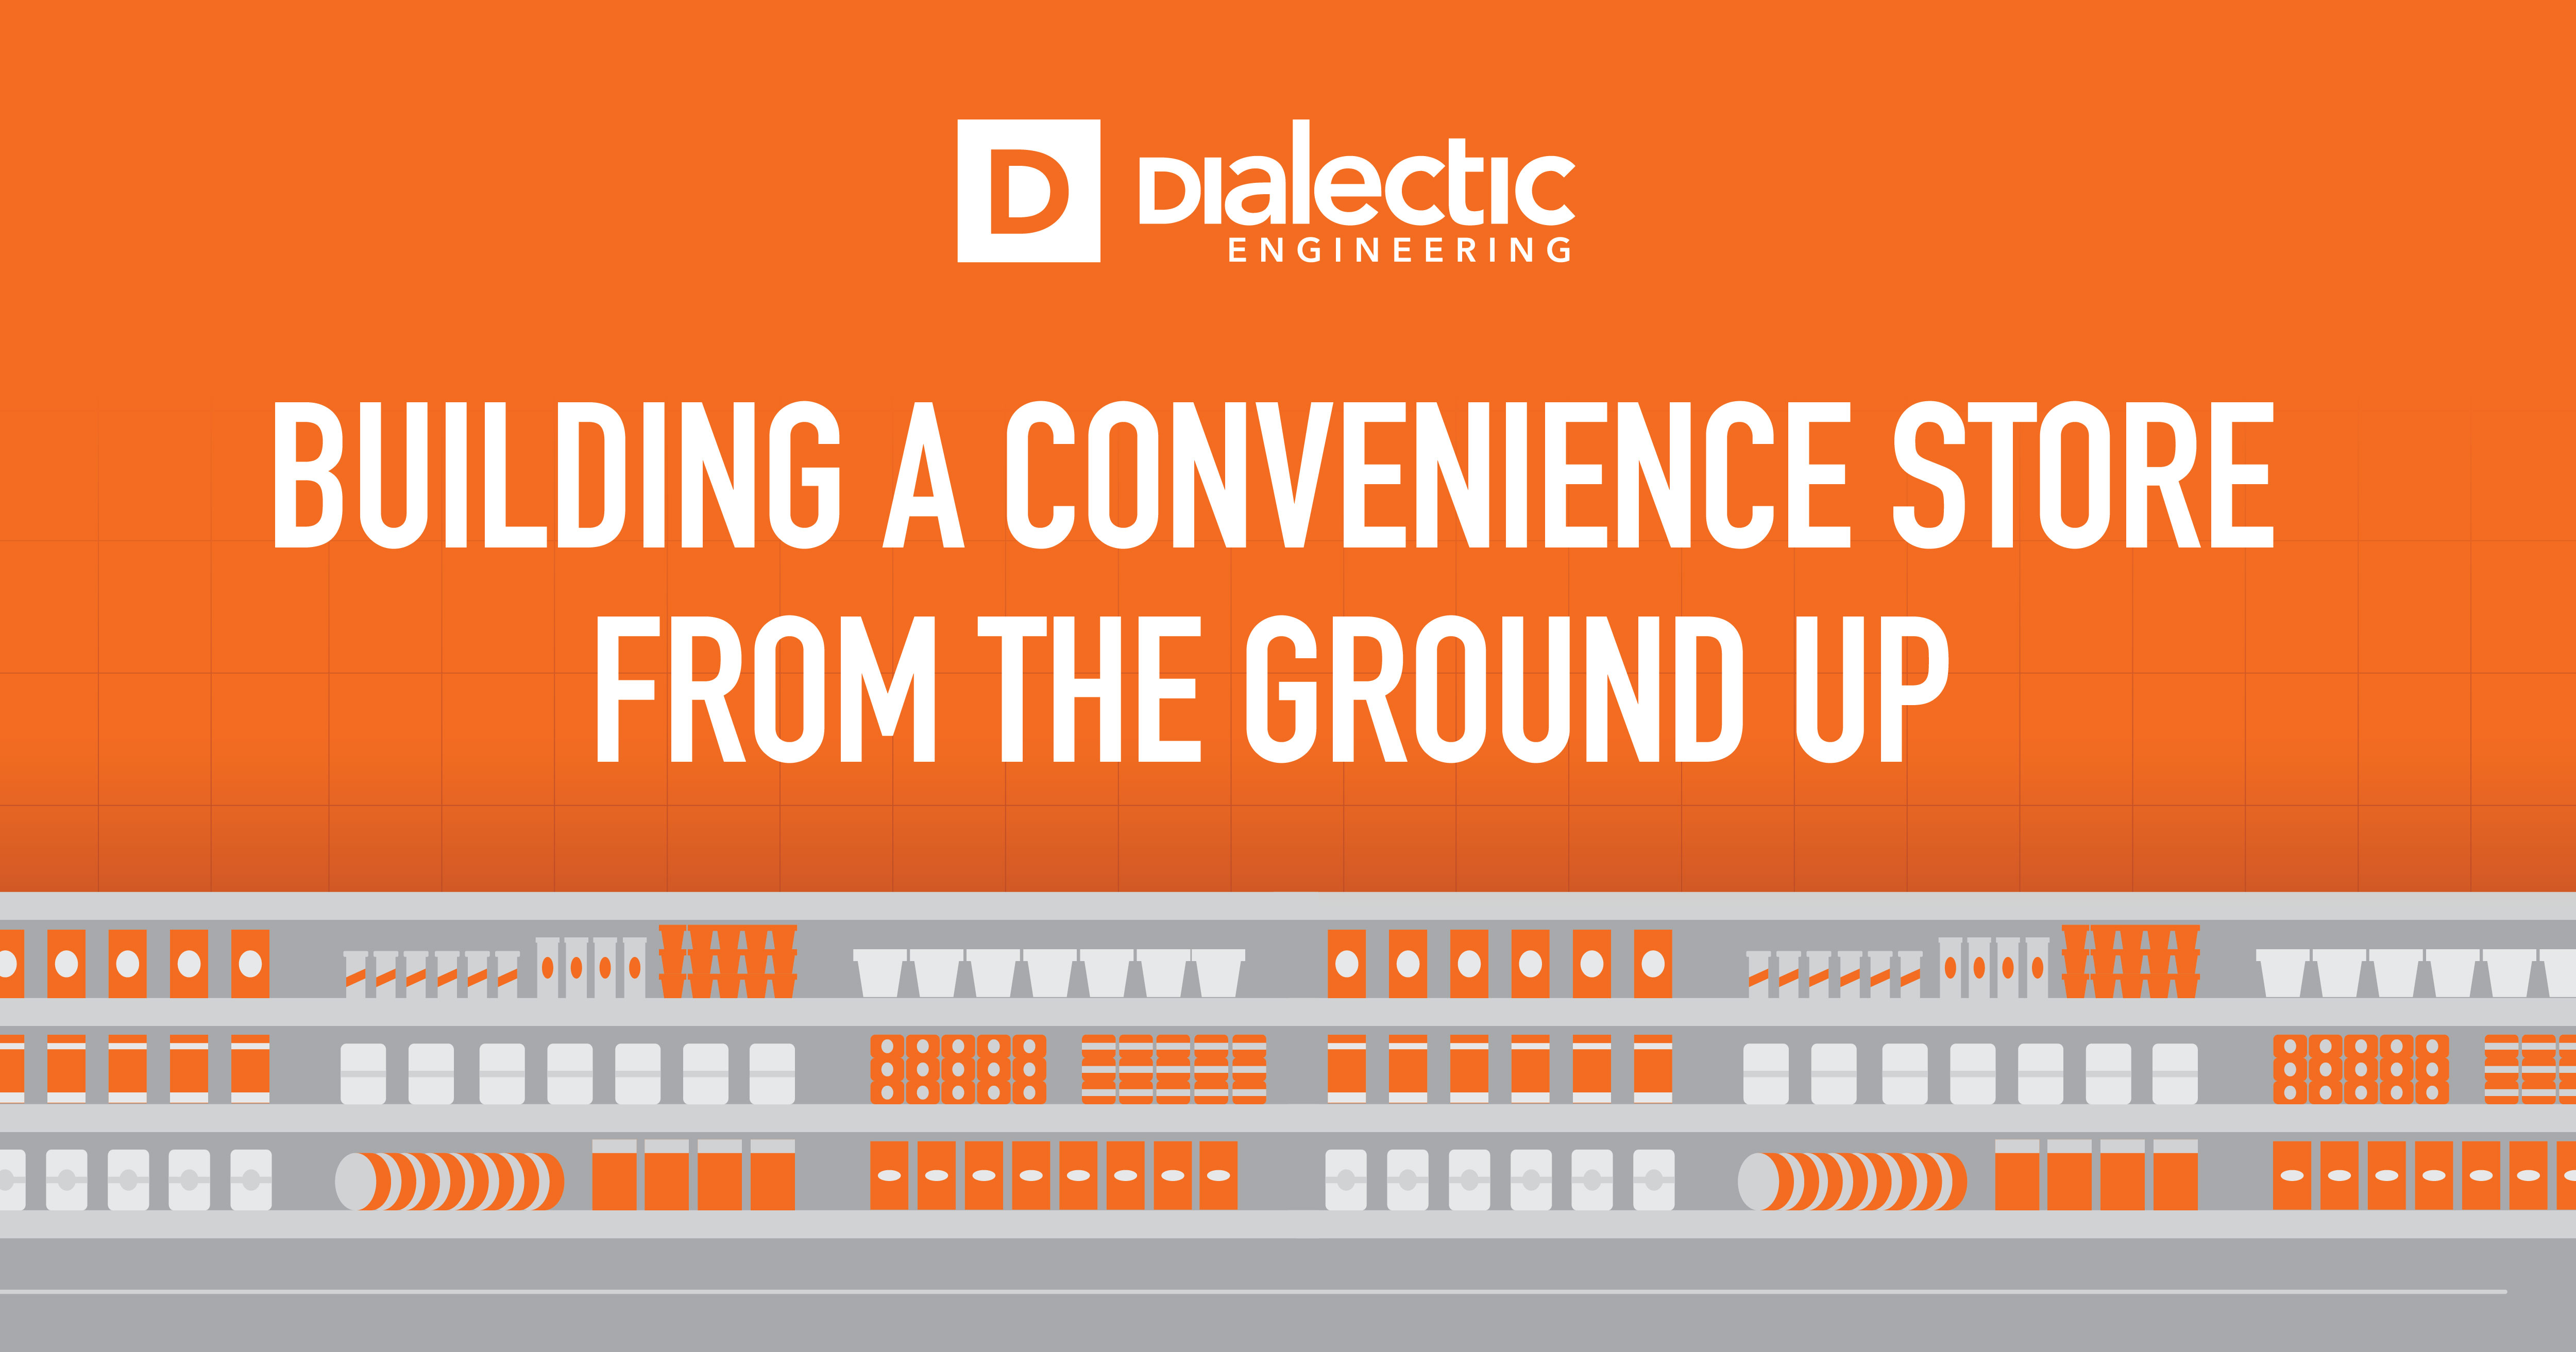 Building a convenience store from the ground up